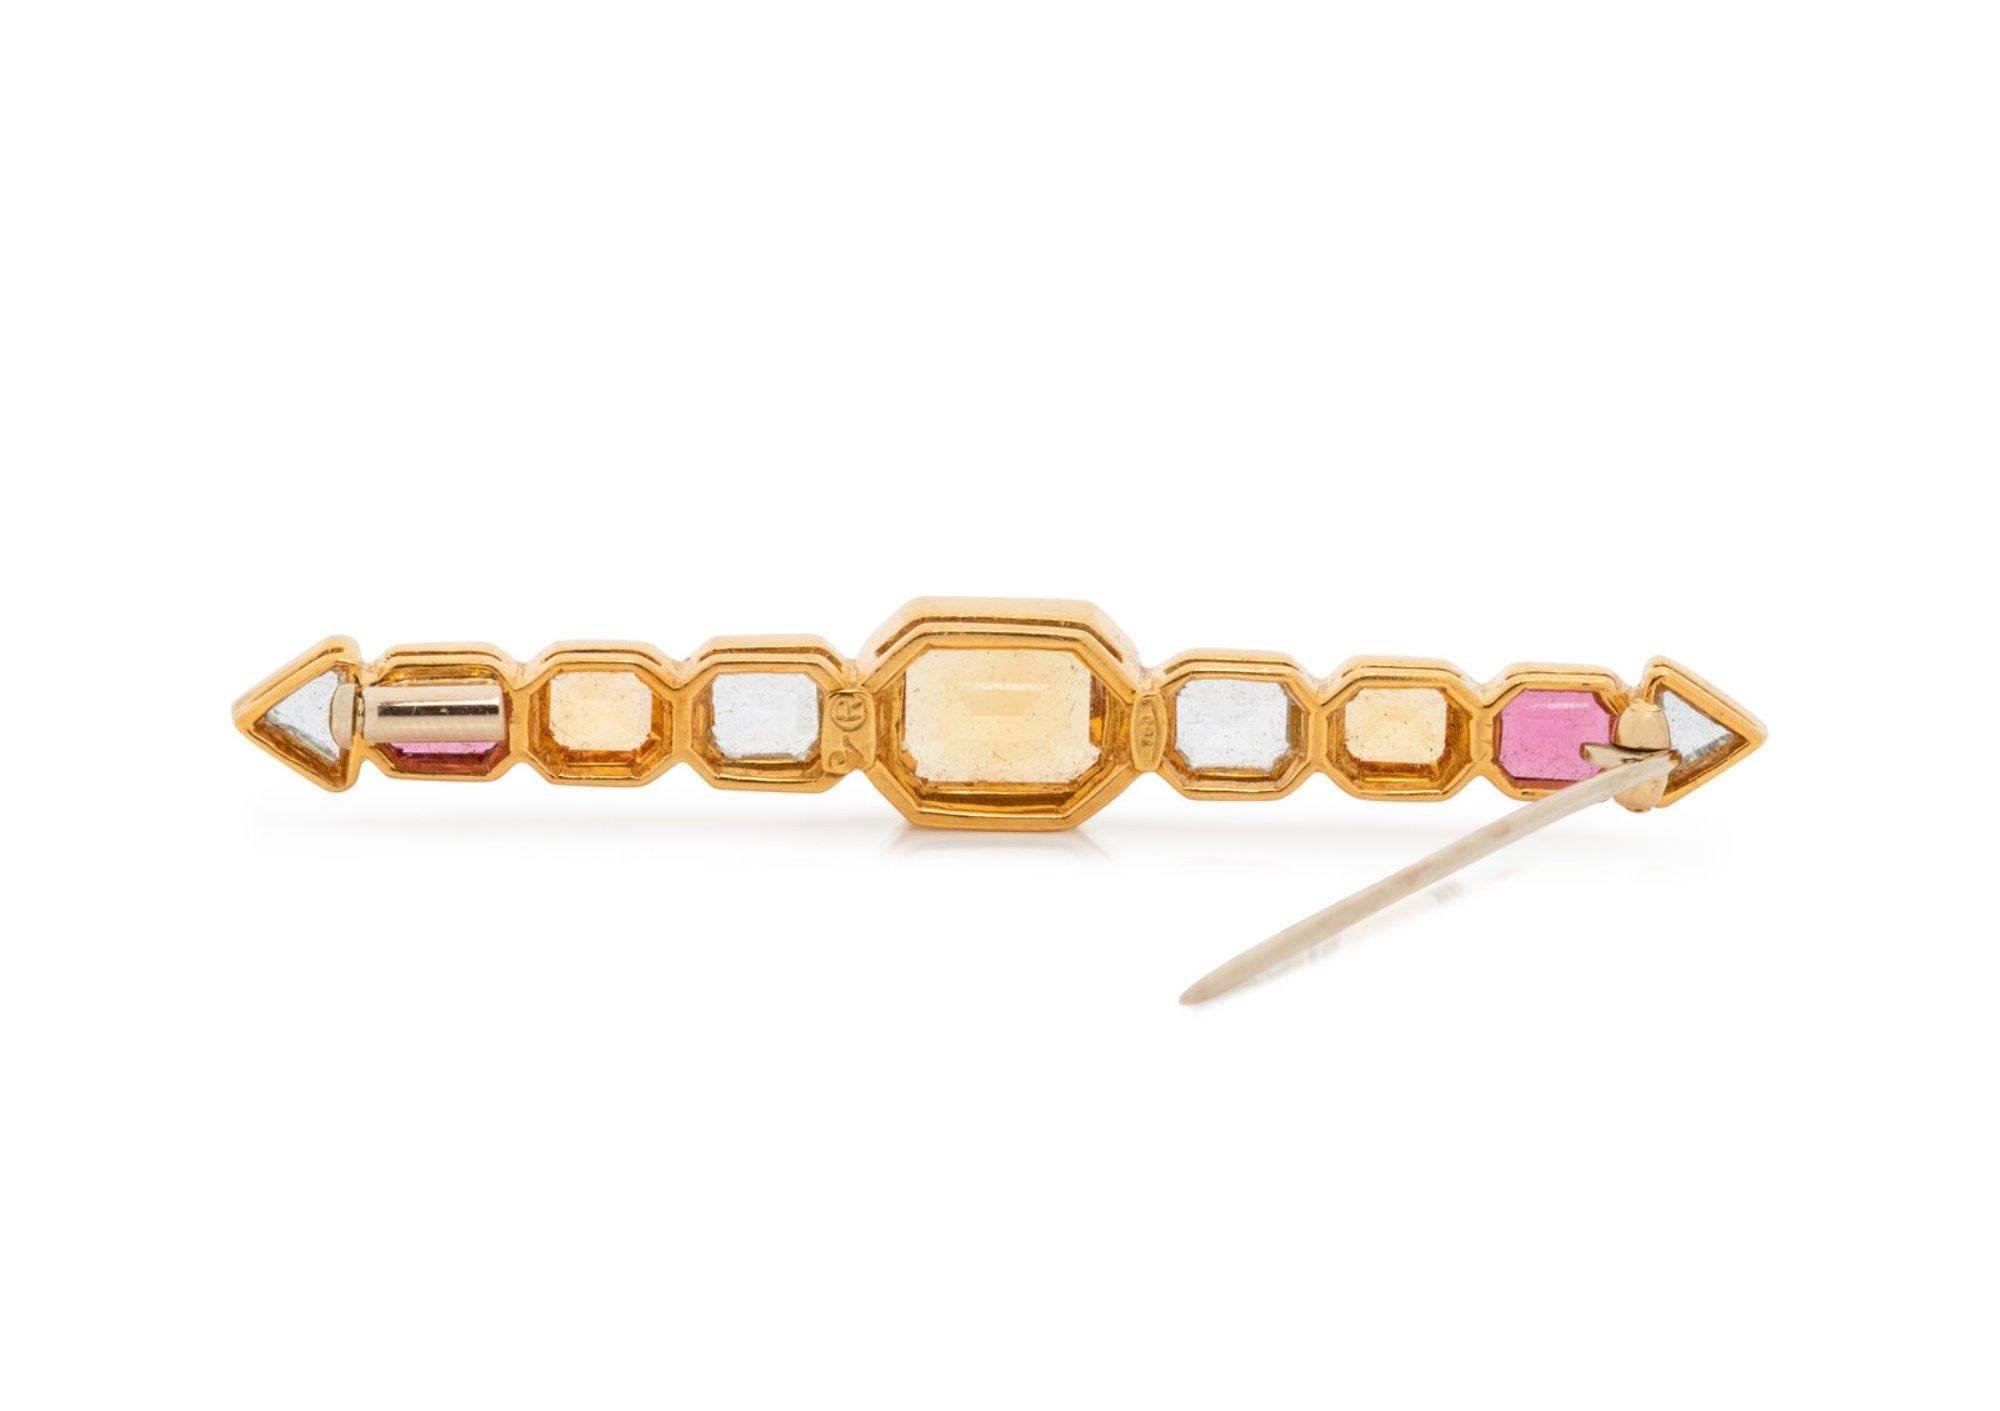 This is a stunning multi stone double arrow design brooch set with natural citrines, aquamarines and pink tourmalines.  The brooch is hallmarked 750 and has a makers mark R. There are 4 aquamarines, 3 citrines and 2 pink tourmalines.  The stones all